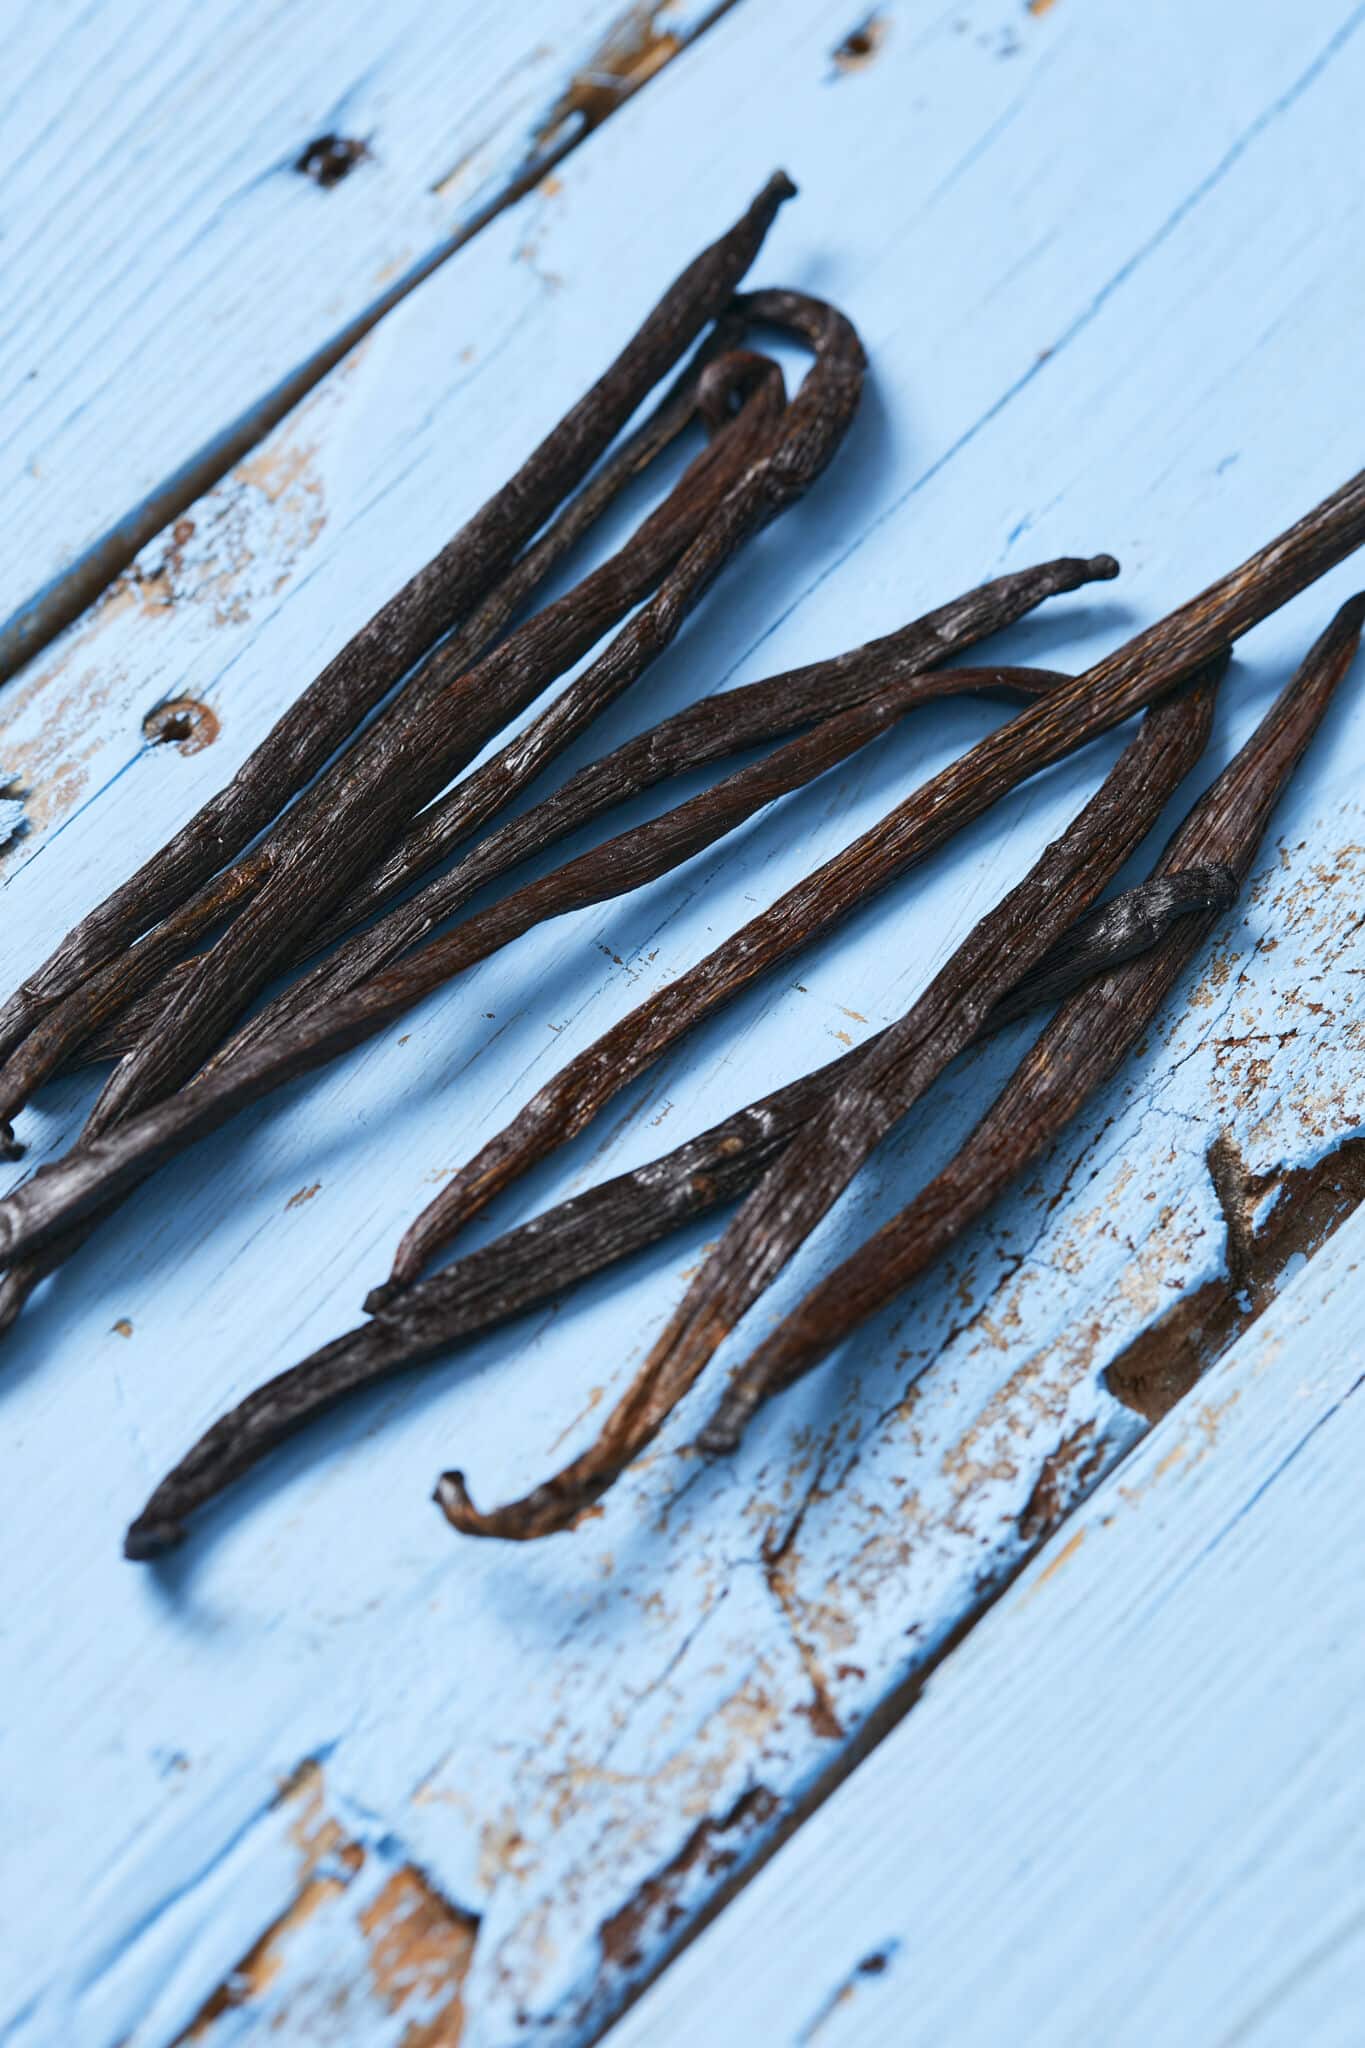 Long and slender vanilla bean pods are placed on a blue wooden board, resembling thin dark brown or blackish-brown cylinders. They are about 4 to 8 inches (10 to 20 centimeters) in length. with a wrinkled, leathery surface texture.